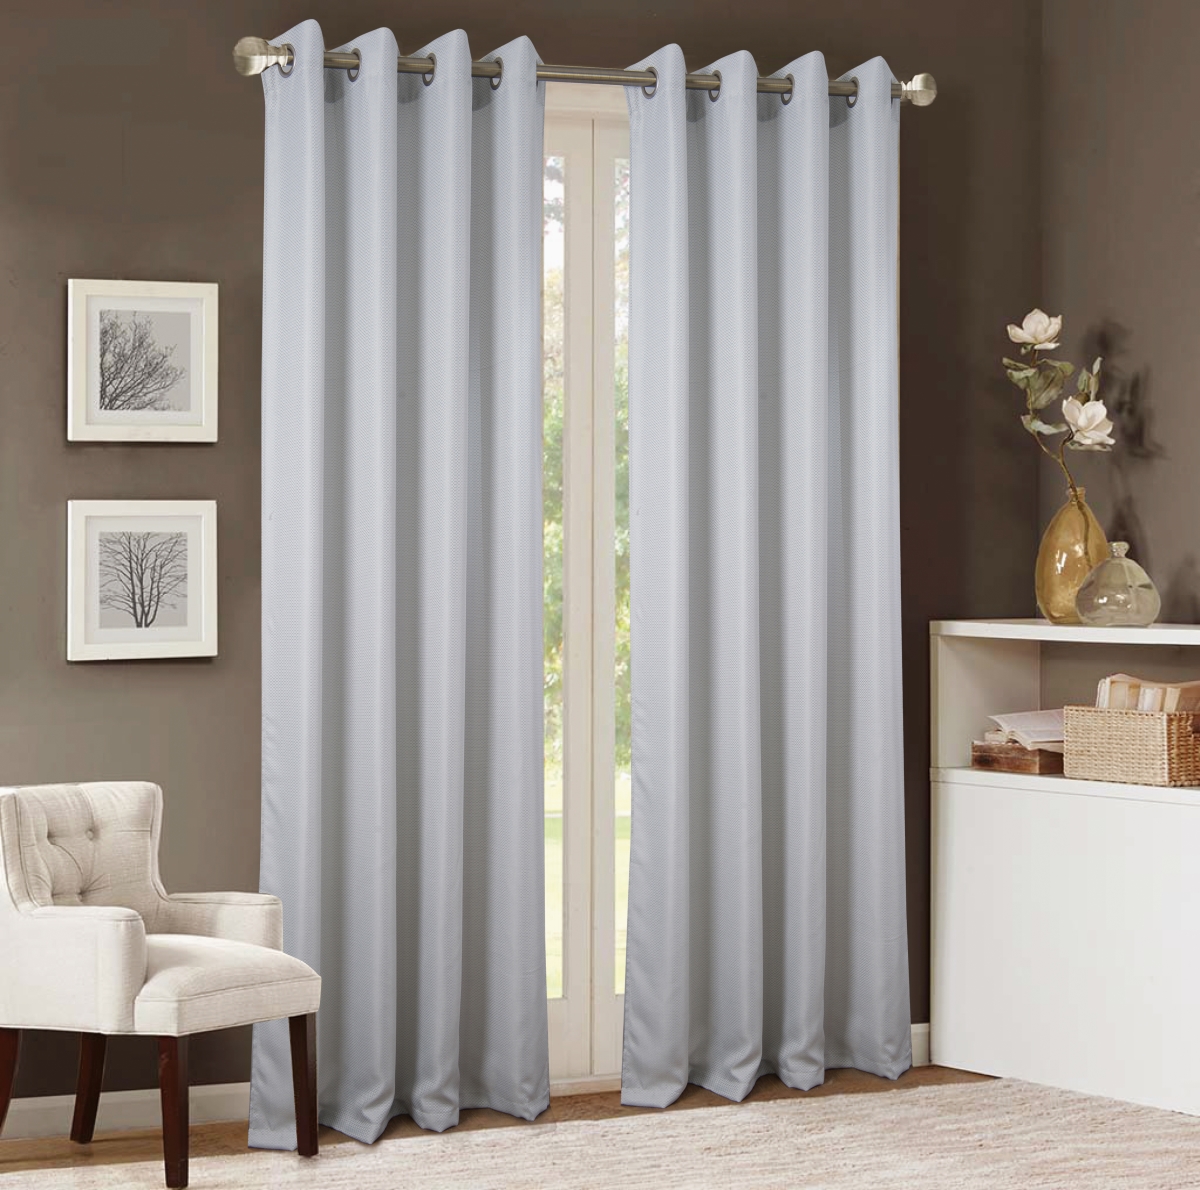 Pna22817 54 X 90 In. Akron Textured Jacquard Single Grommet Curtain Panel, Charcoal